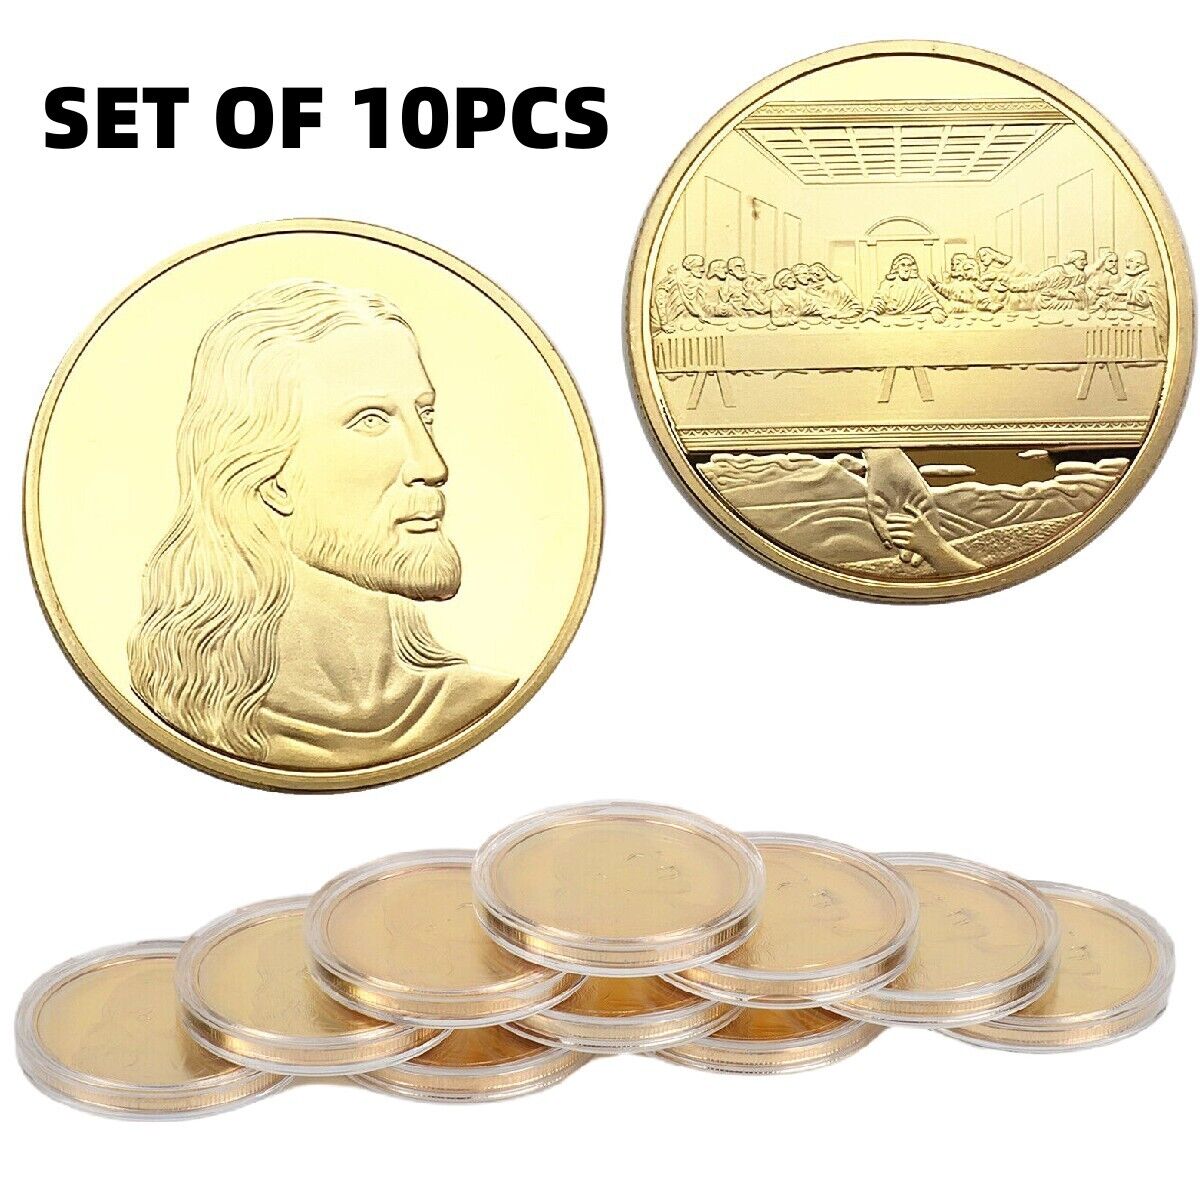 10pcs Jesus Memorial Coin Last Supper Gold Plated Metal Coin Souvenir Gift